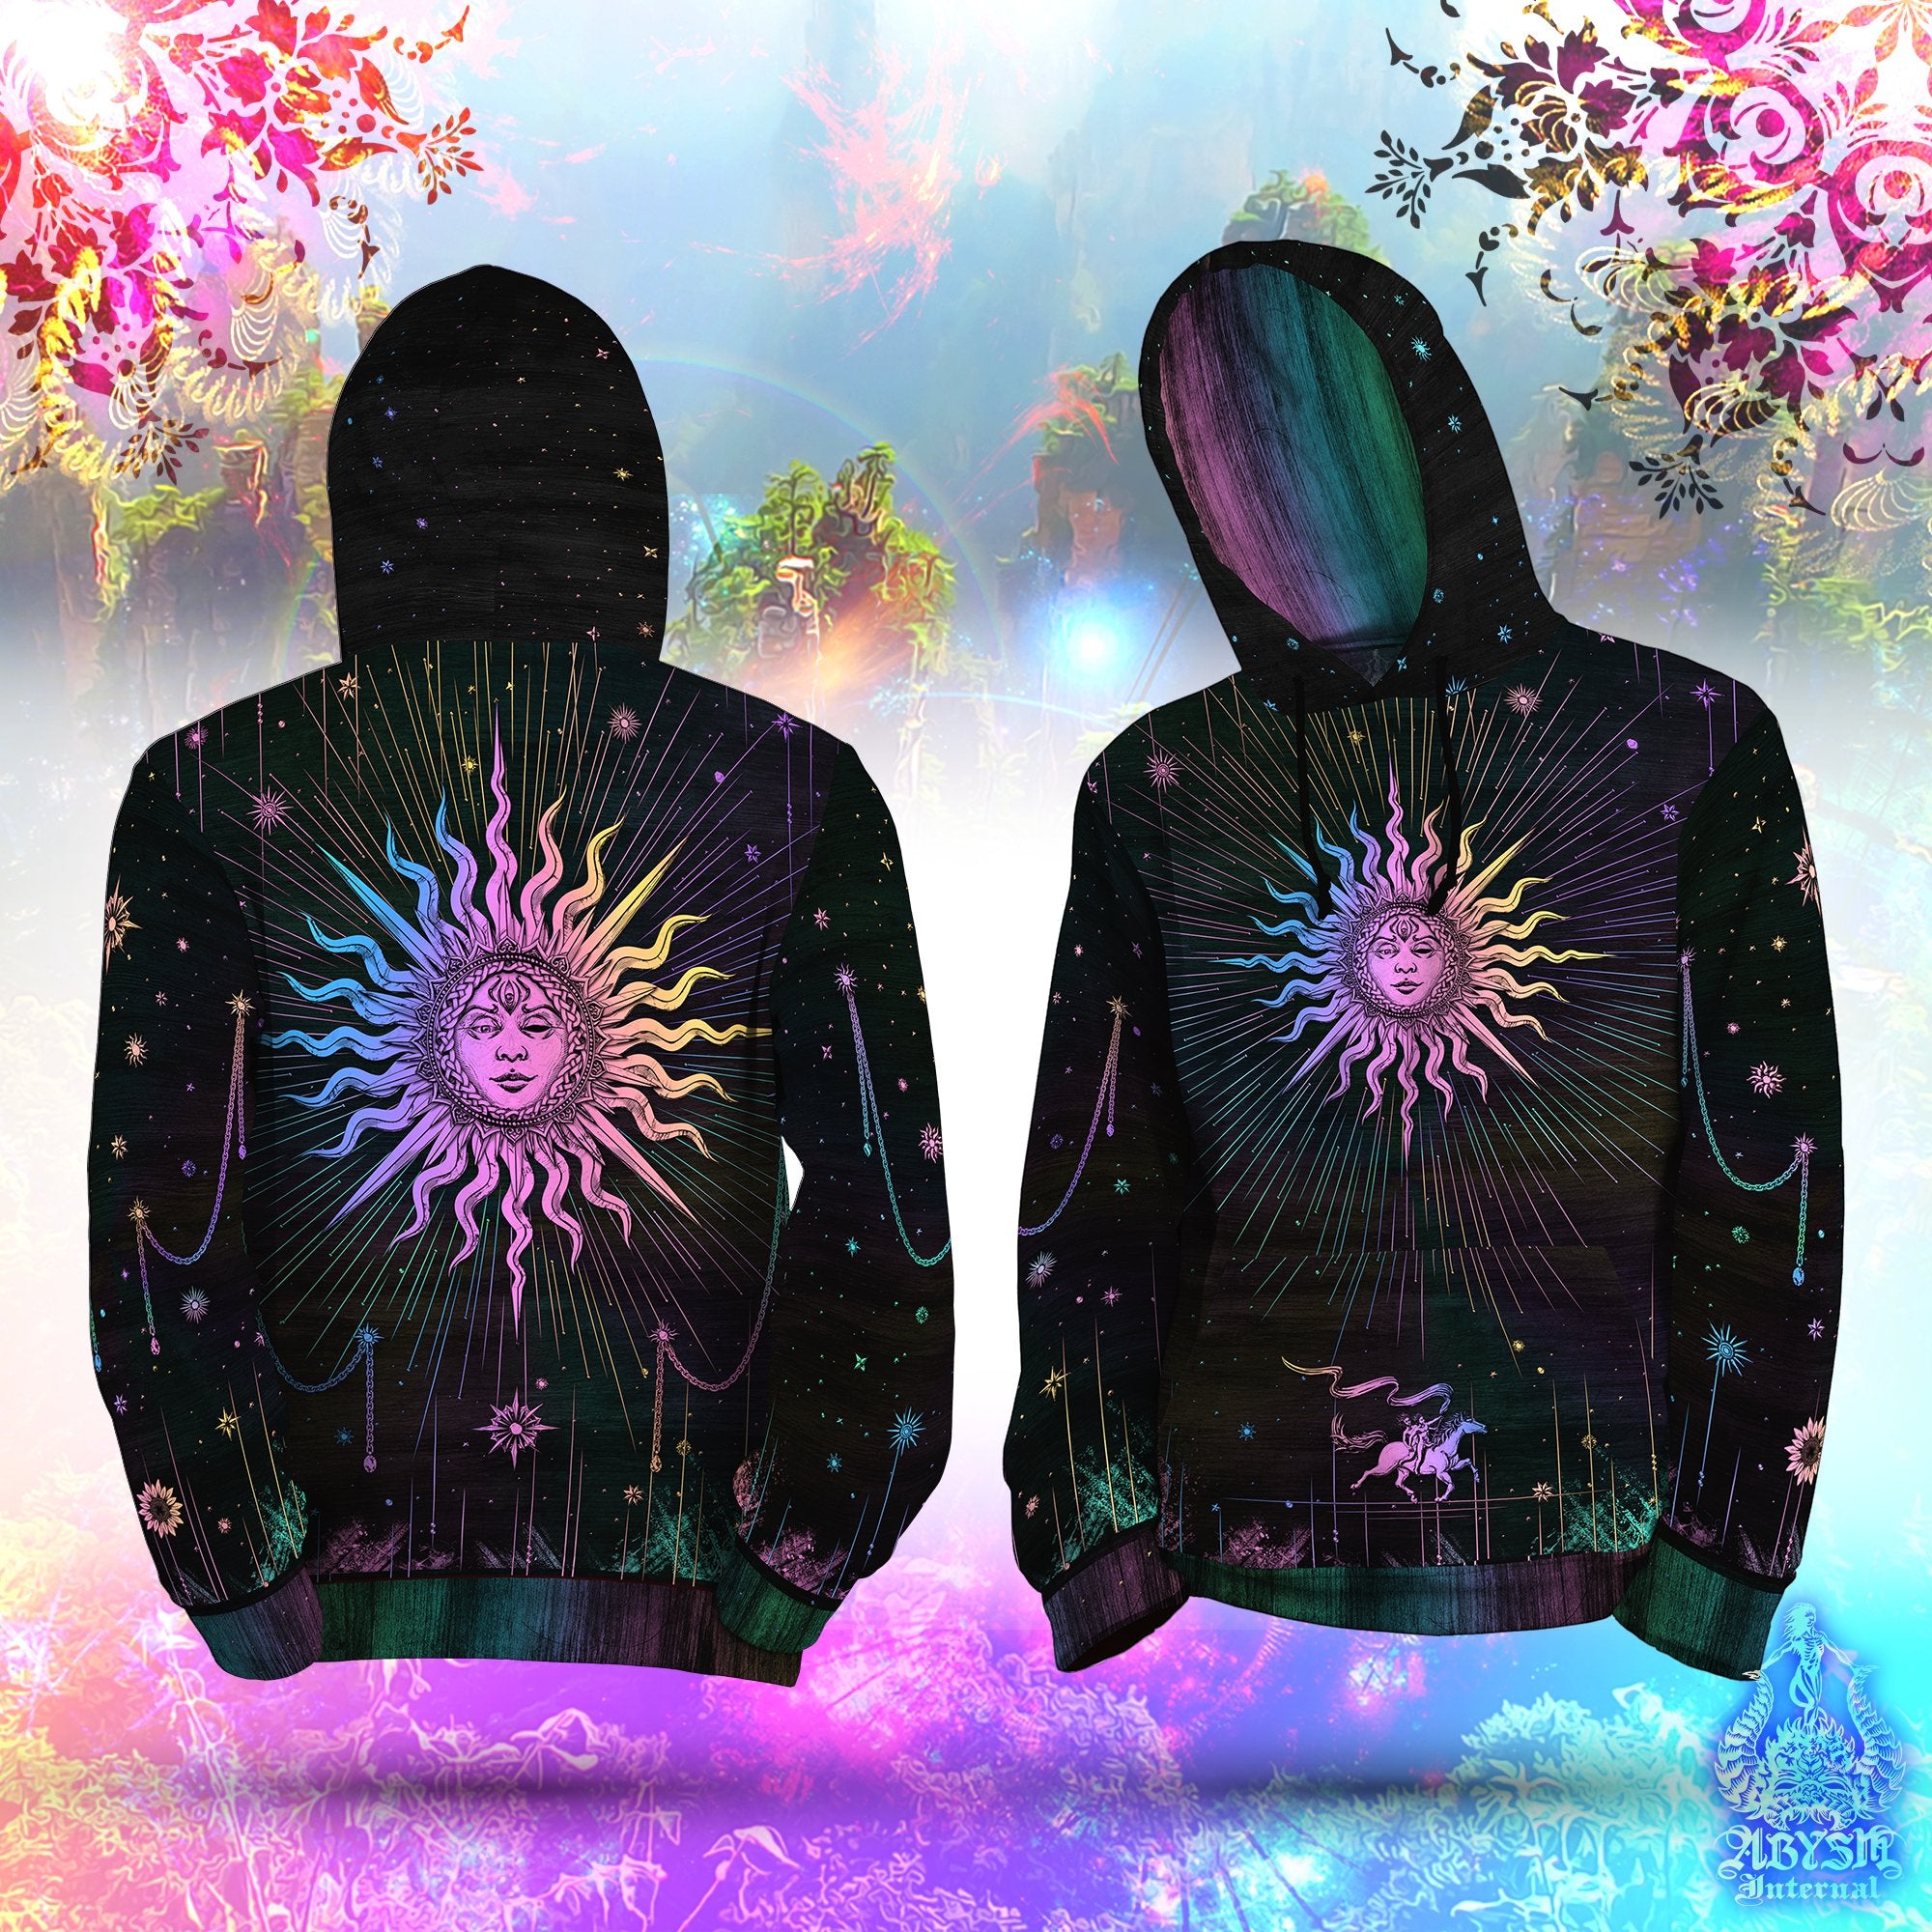 The Sun Hoodie, Tarot Arcana Pullover, Indie Sweater, Magic Party Street Outfit, Esoteric Streetwear, Boho Festival Clothing, Unisex - Dark Pastel - Abysm Internal